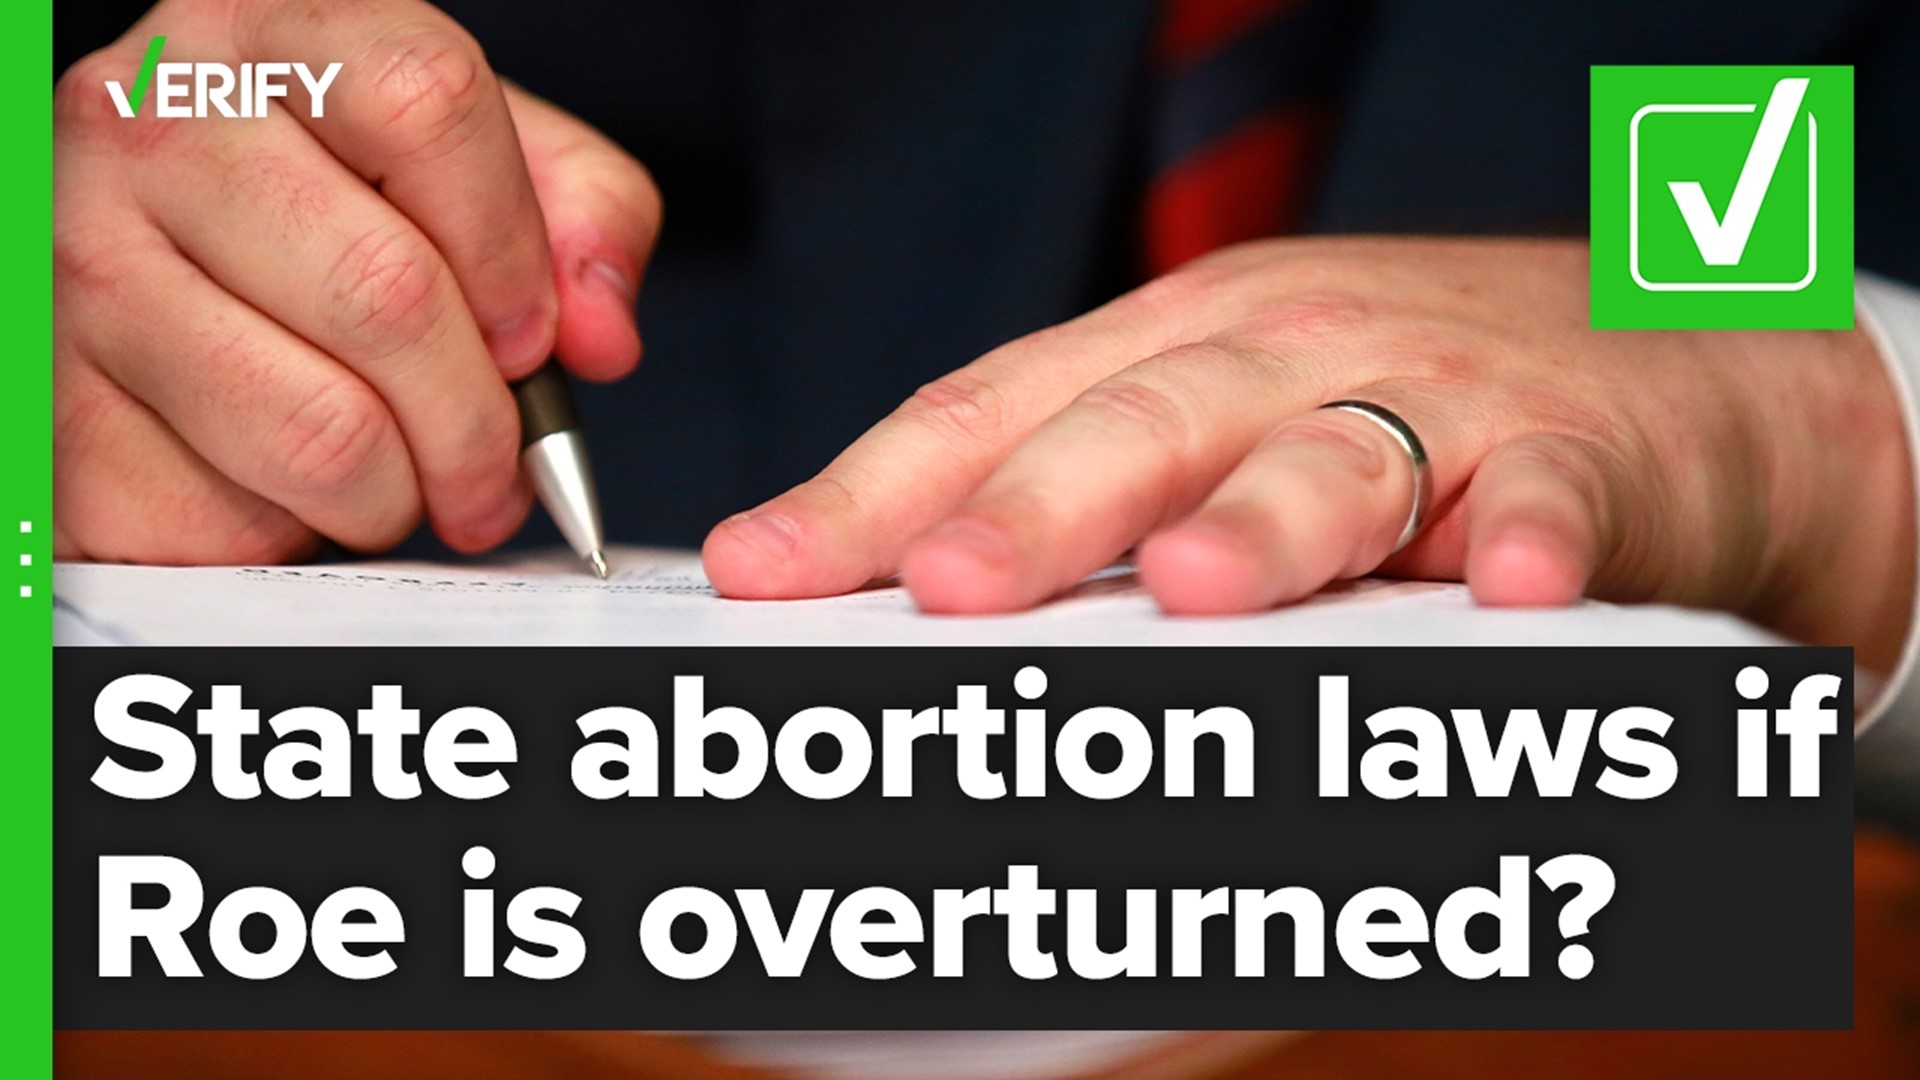 Can states pass their own abortion laws if Roe v. Wade is overturned? The VERIFY team confirms this is true.